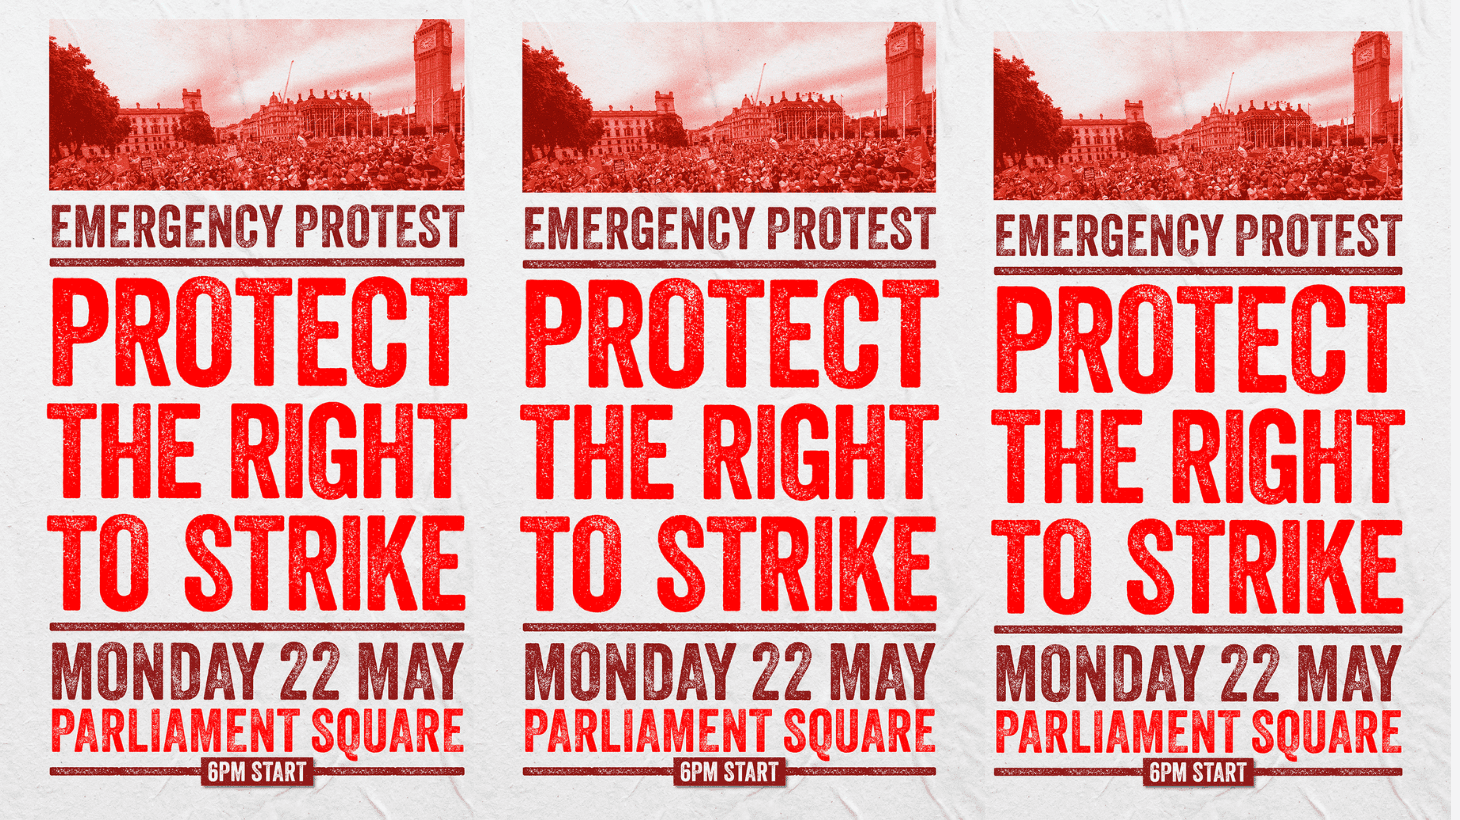 Three identical posters side by side. The picture at the top is of a crowd in Westminster with Big Ben clock tower on the right. Text reads "Emergency Protest: Protect the right to strike. Monday 22 May Parliament Square 6pm start." The colours of the poster are entirely shades of red on a marbled grey background. 